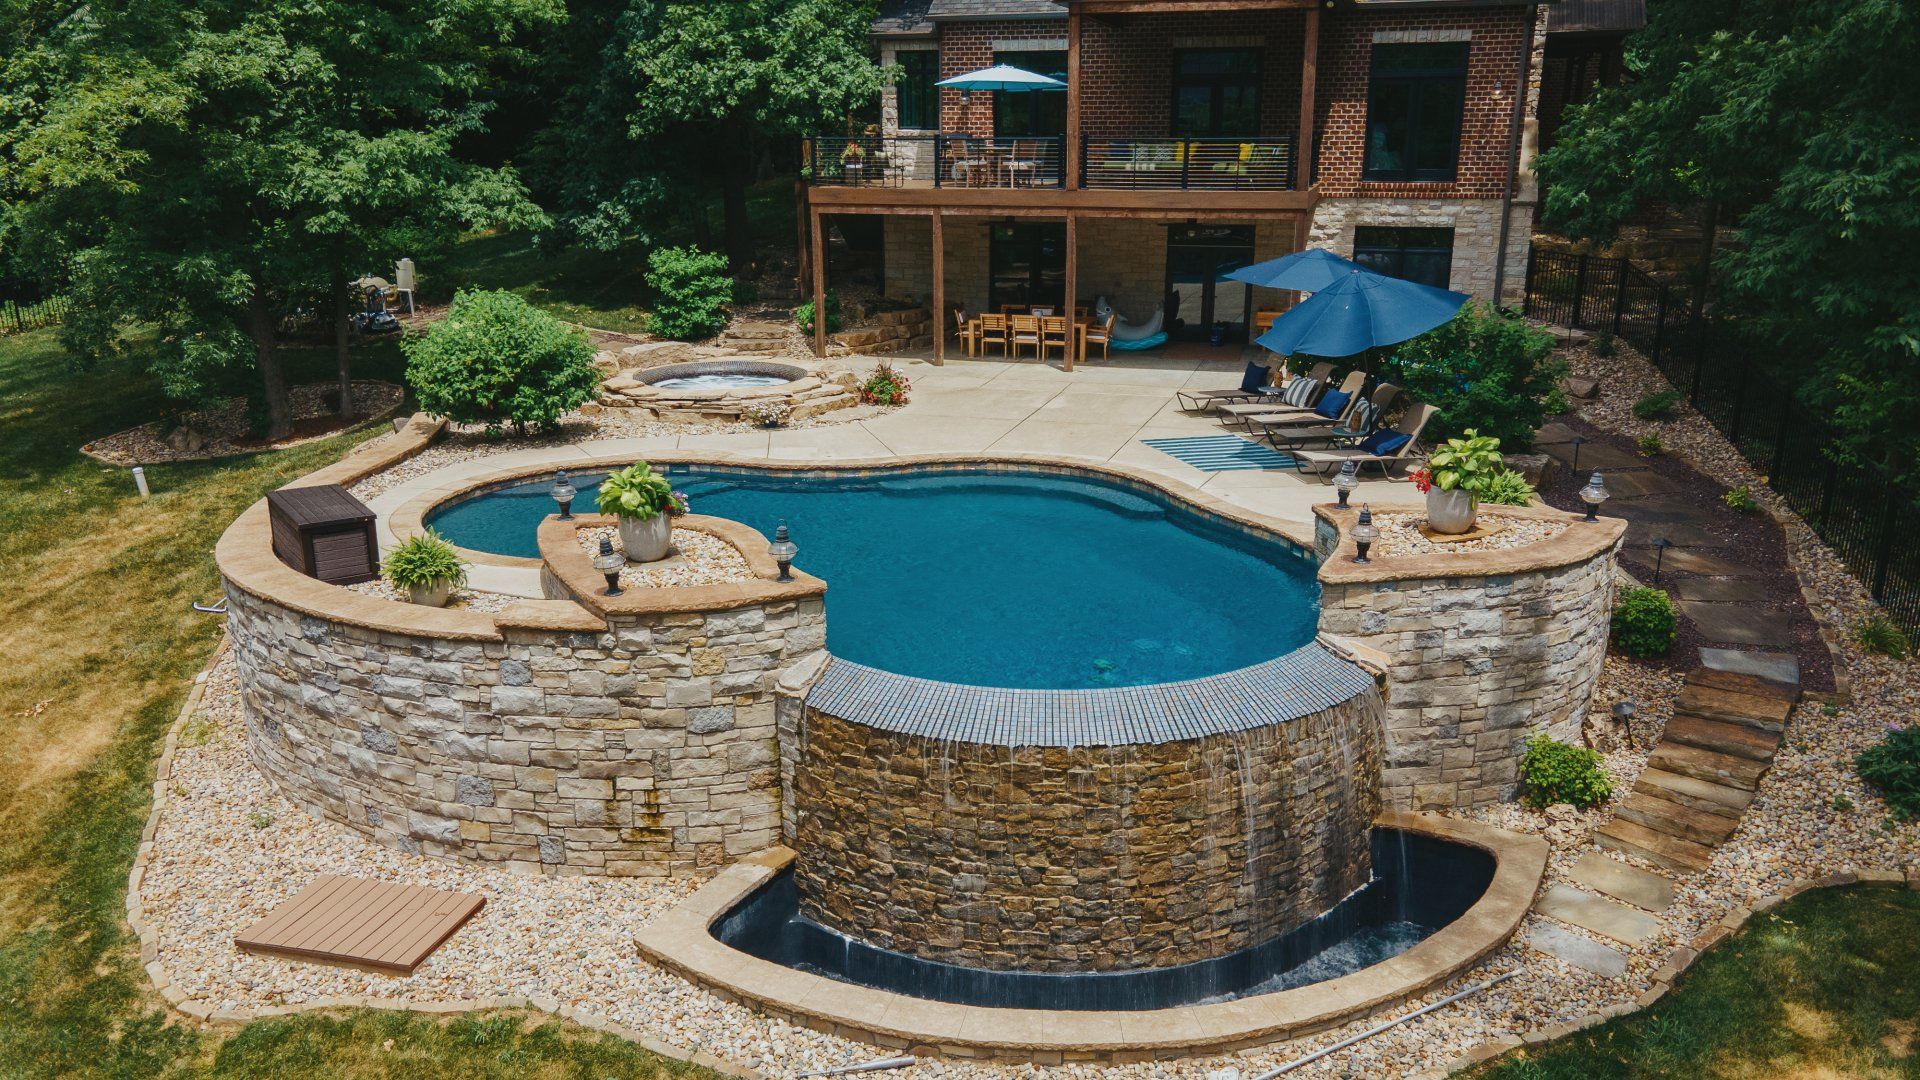 Custom form pool with rock waterfalls feature in front of a desert themed house.jpg